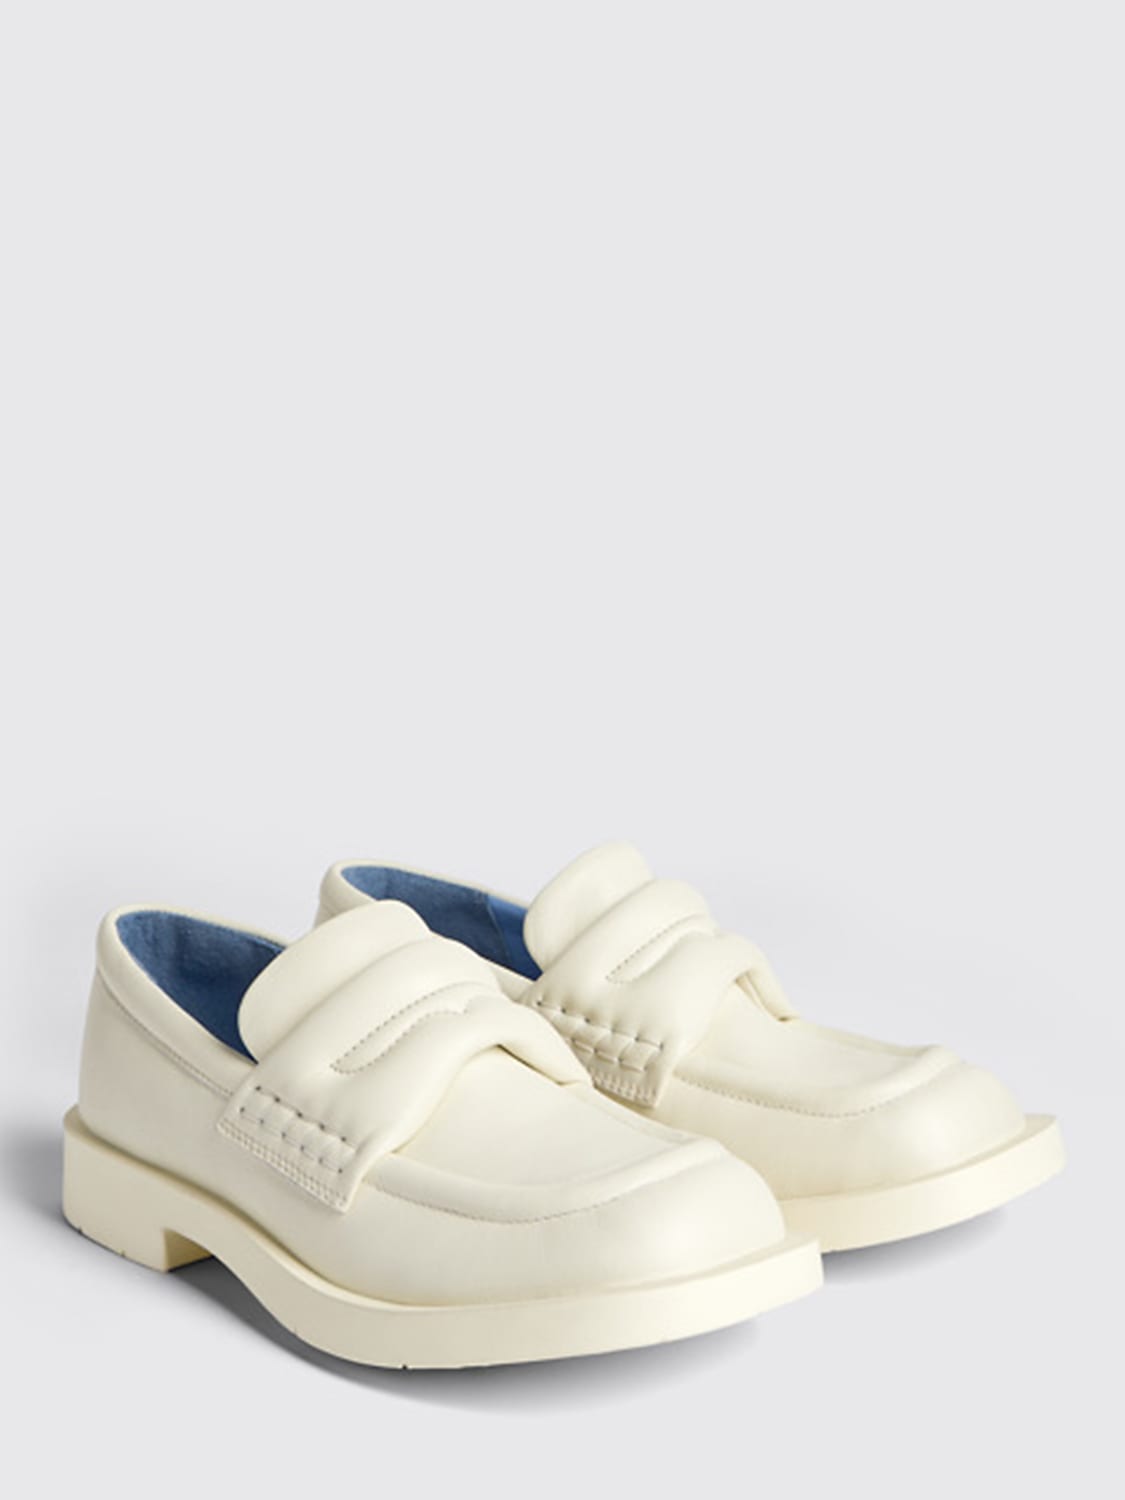 Camperlab Outlet: loafers for woman - White | Camperlab loafers